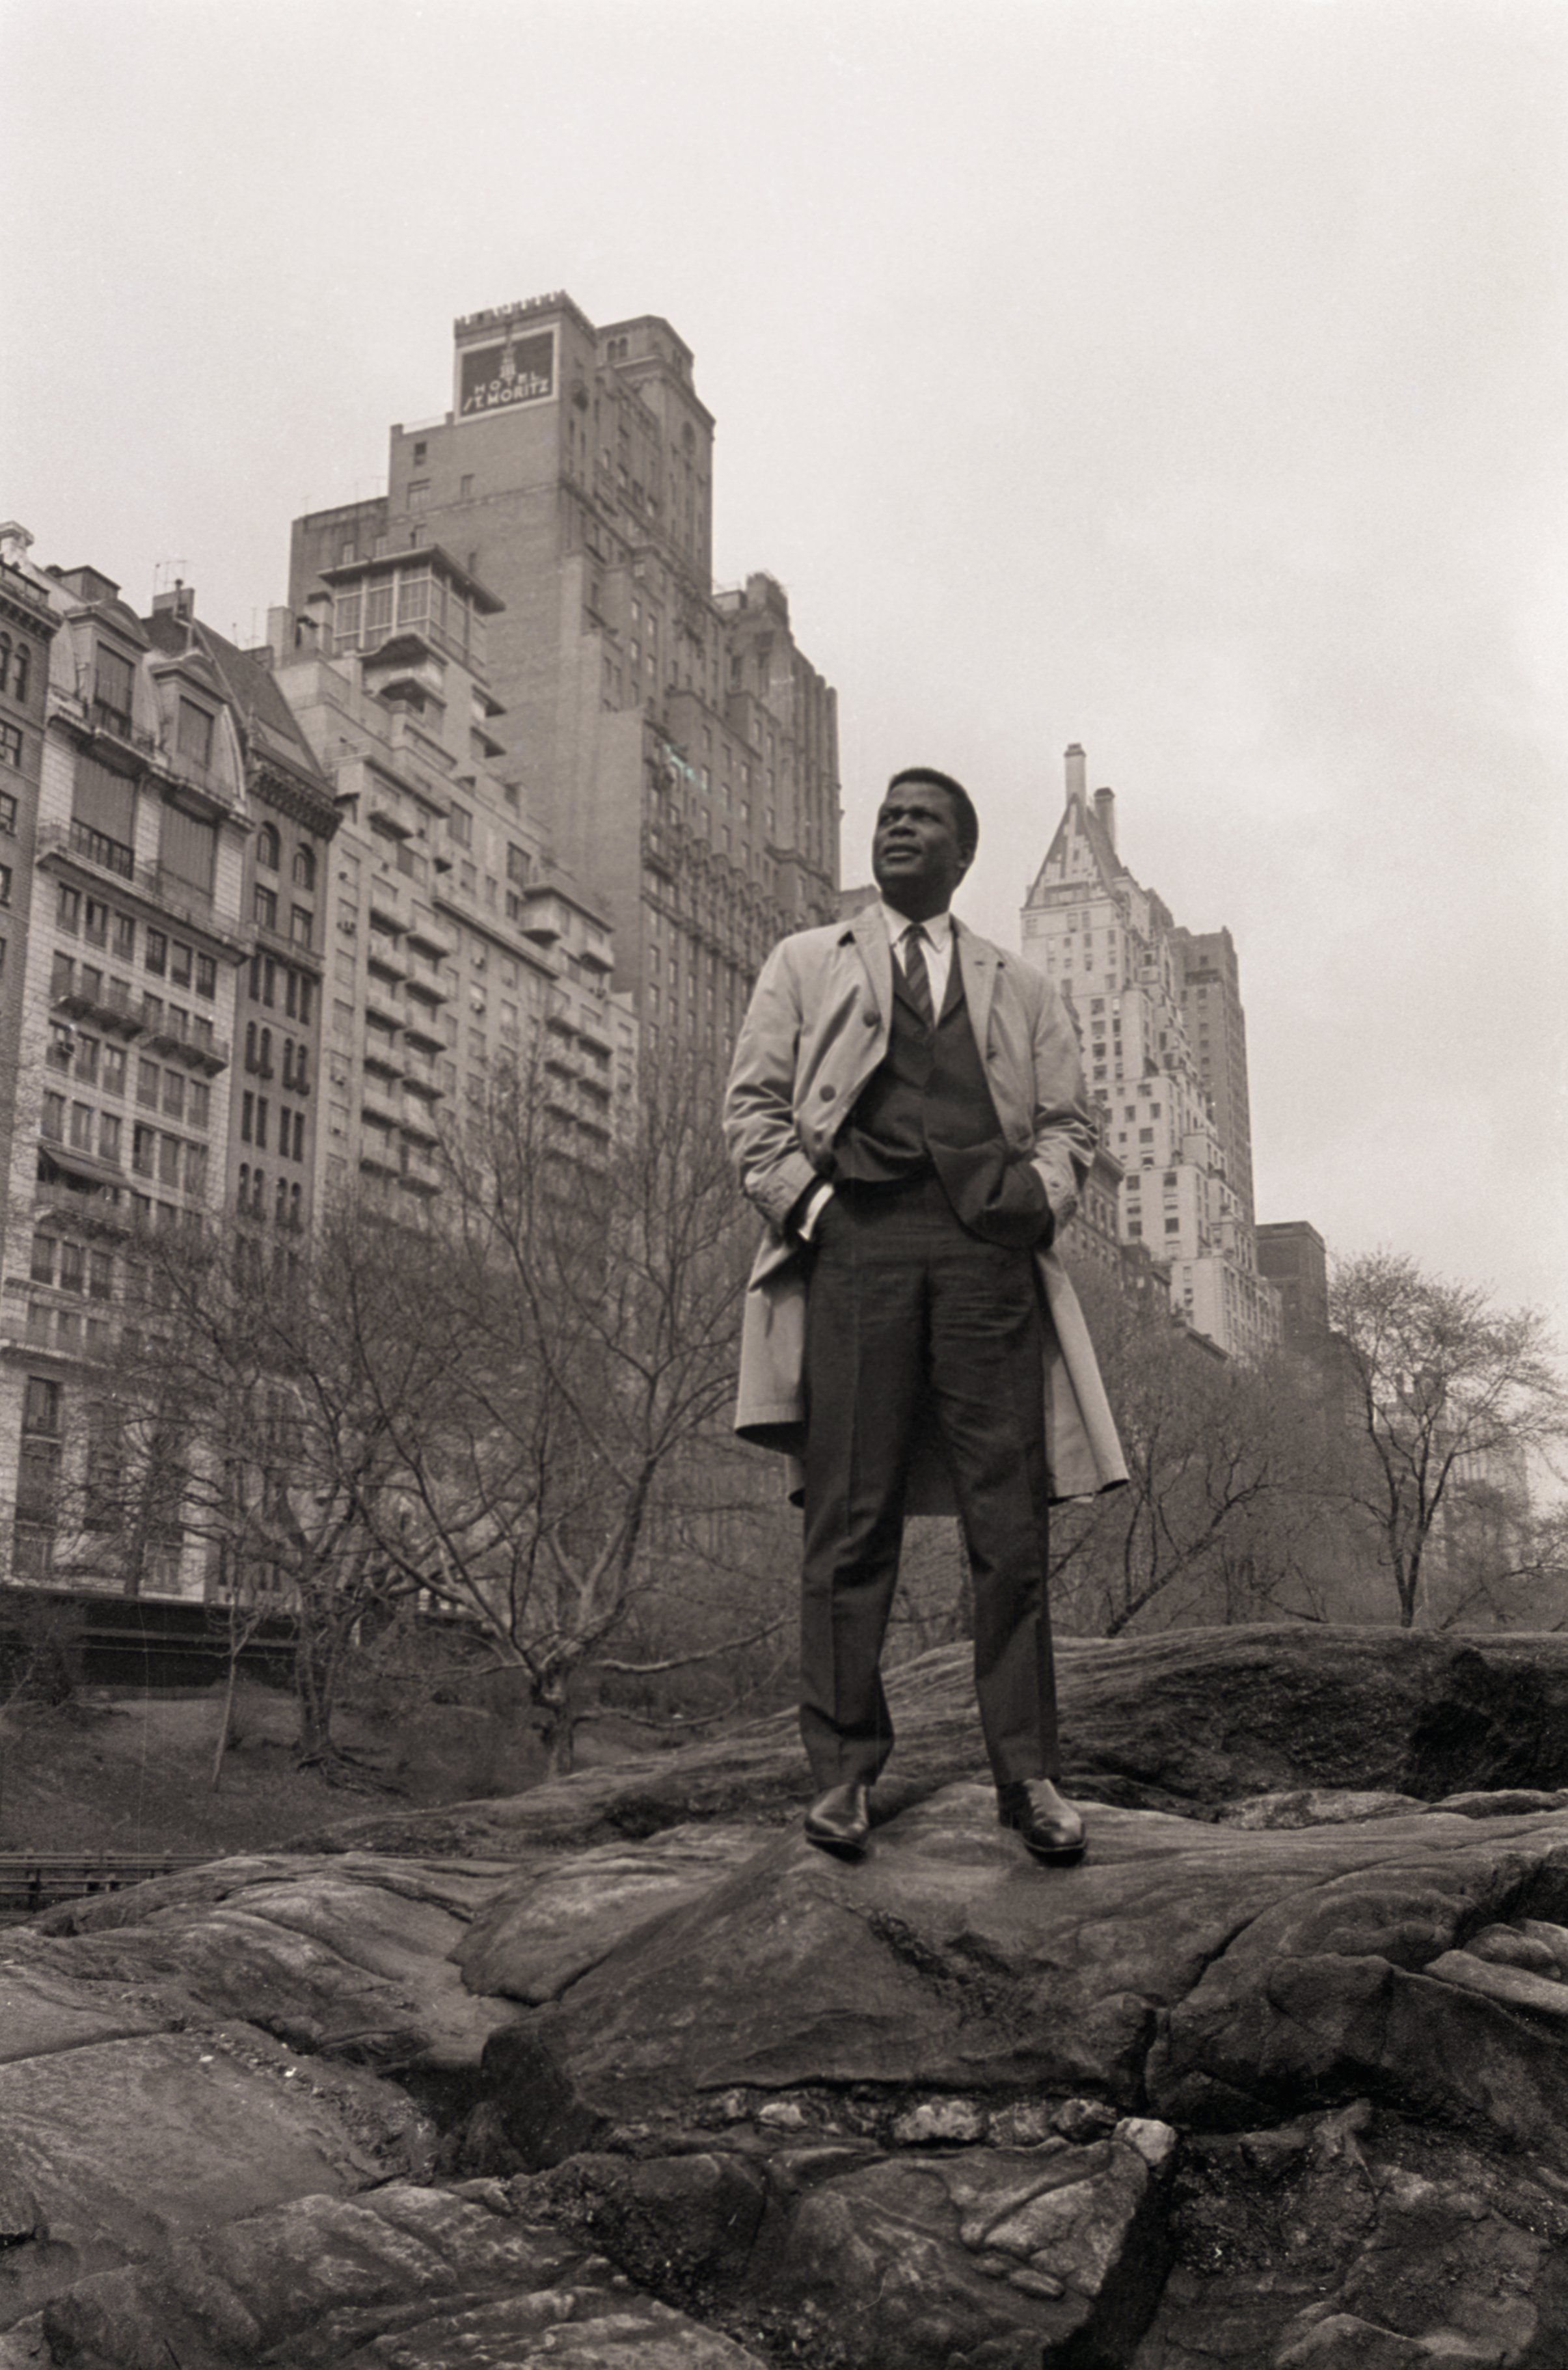 Sidney Poitier poses against a background of New York apartment buildings on April 29, 1964, in New York City| Source: Getty Images